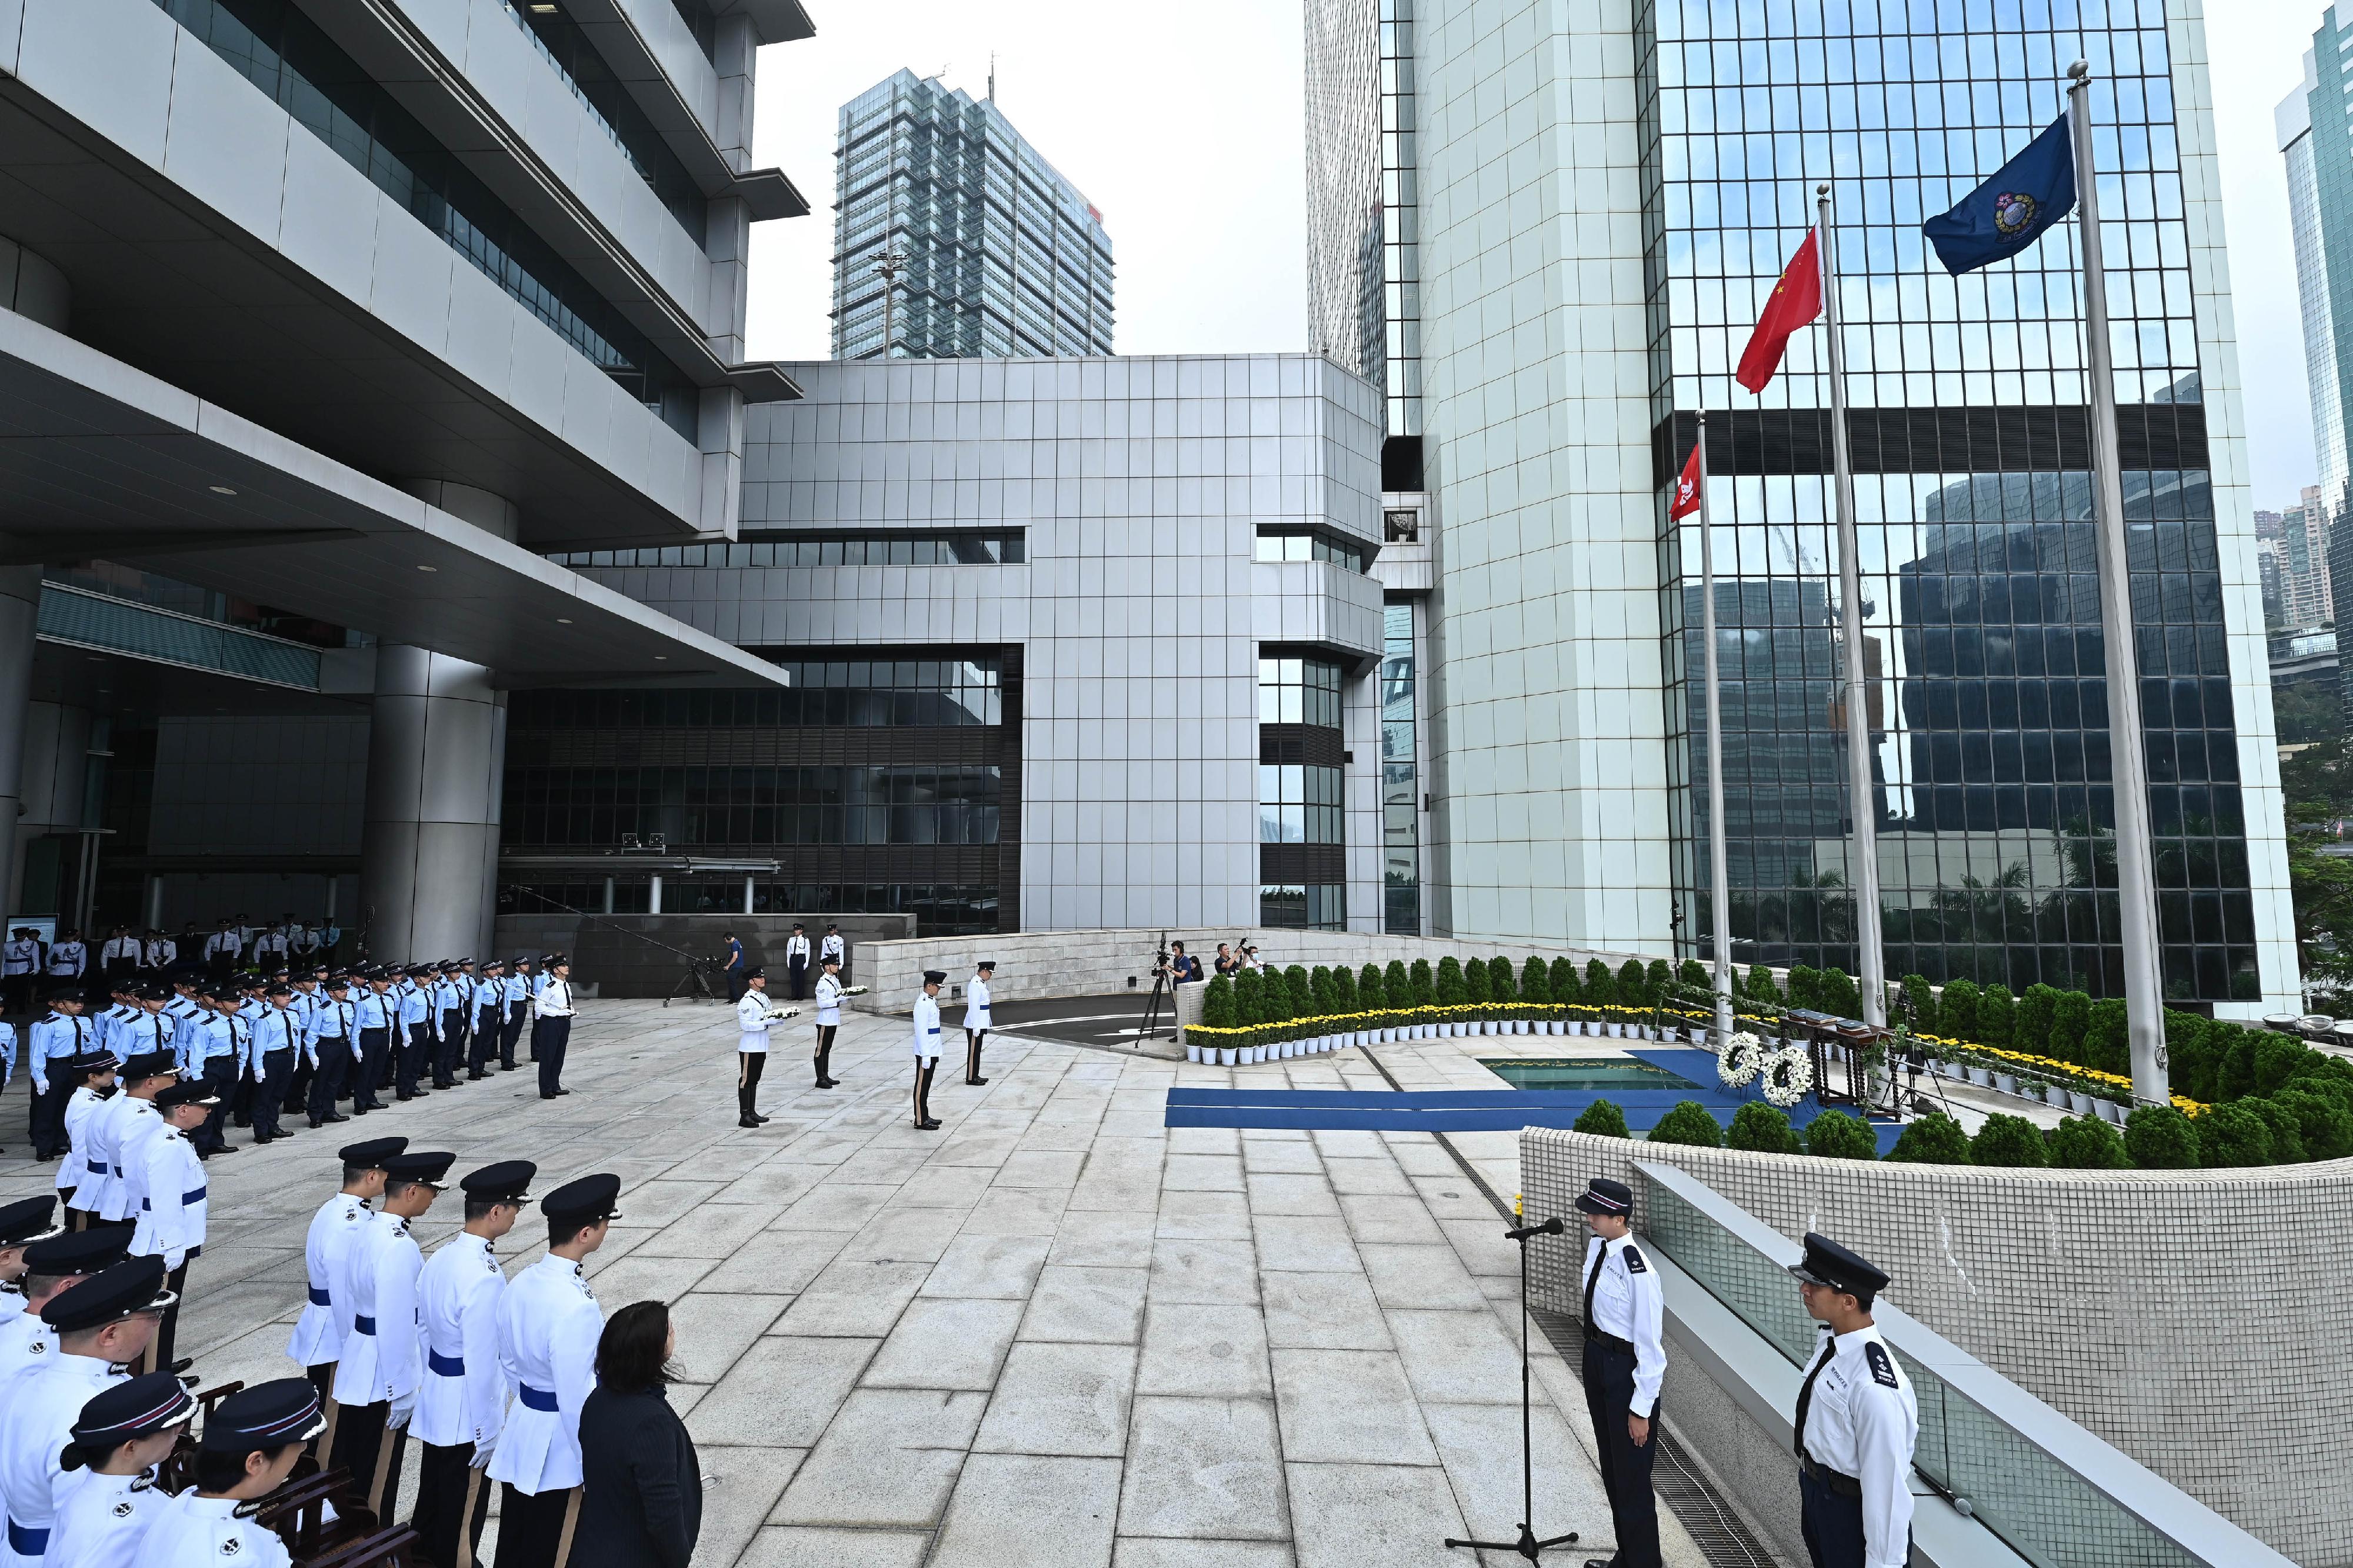 The Hong Kong Police Force holds a ceremony at the Police Headquarters this morning (November 10) to pay tribute to members of the Hong Kong Police Force and Hong Kong Auxiliary Police Force who have given their lives in the line of duty.